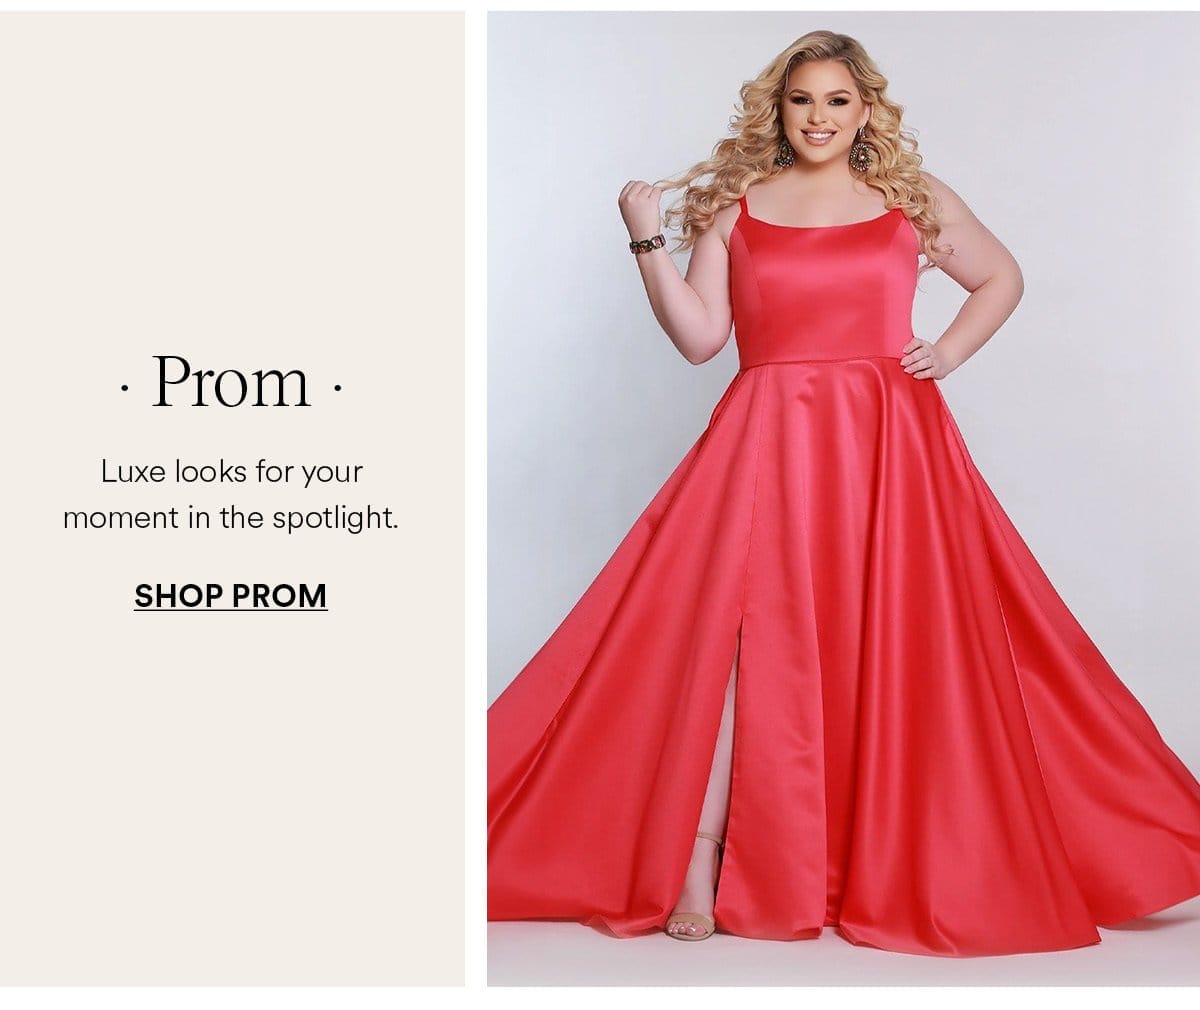 Prom Luxe looks for your moment in the spotlight. Shop Prom